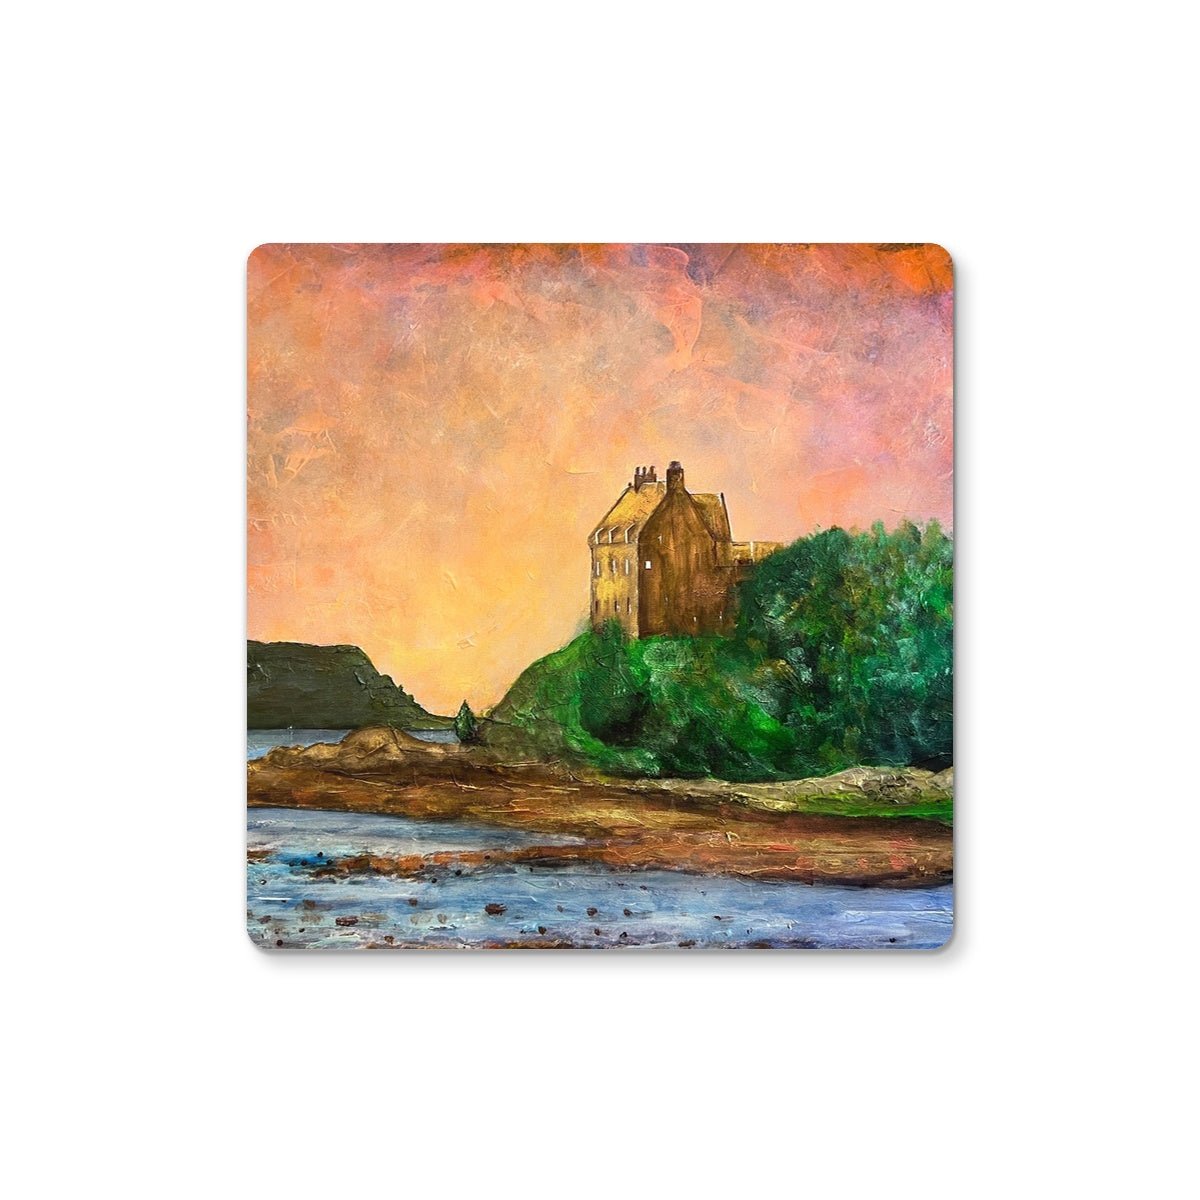 Duntrune Castle Art Gifts Coaster-Coasters-Scottish Castles Art Gallery-4 Coasters-Paintings, Prints, Homeware, Art Gifts From Scotland By Scottish Artist Kevin Hunter